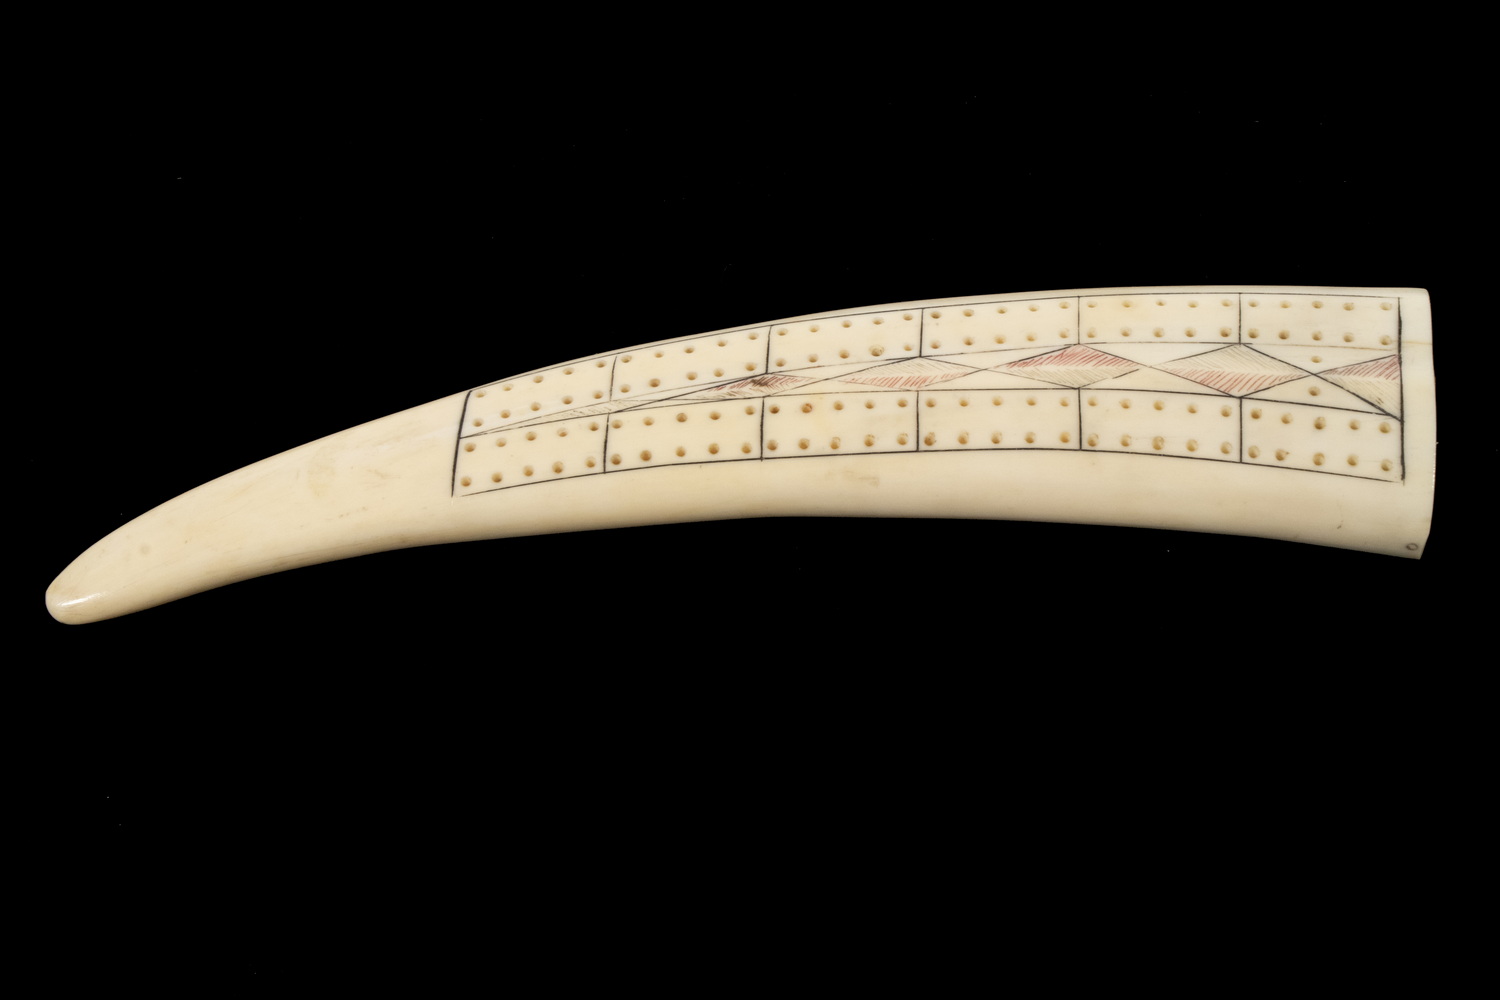 INUIT CRIBBAGE BOARD FROM WALRUS 2b1d6e